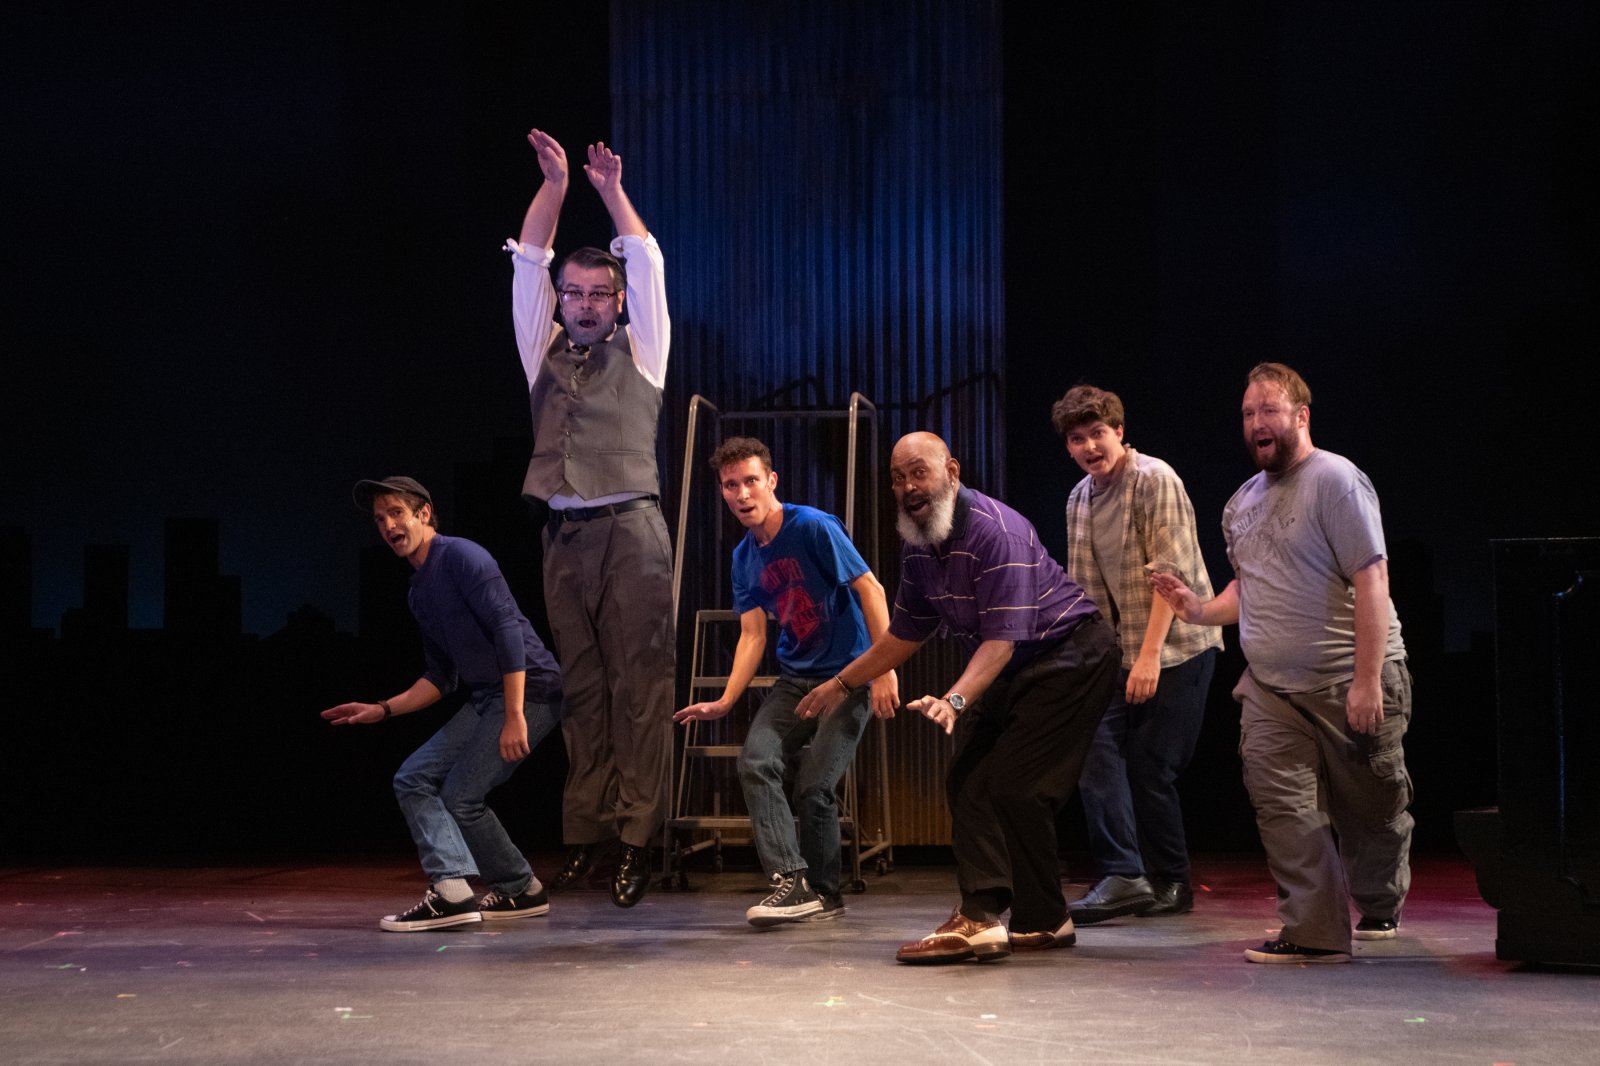 (l. to r.) Dan DeLuca (Jerry Lukowsk), Zach Thomas Woods (Harold Nichols), Jordan Arrasmith (Ethan Girard), Lee Palmer (Noah “Horse” T. Simmons), Joey Chelius (Malcolm MacGregor) and Nathan Marinan (Dave Bukatinsky) in Skylight Music Theatre’s production of The Full Monty running September 24 – October 17, 2021.